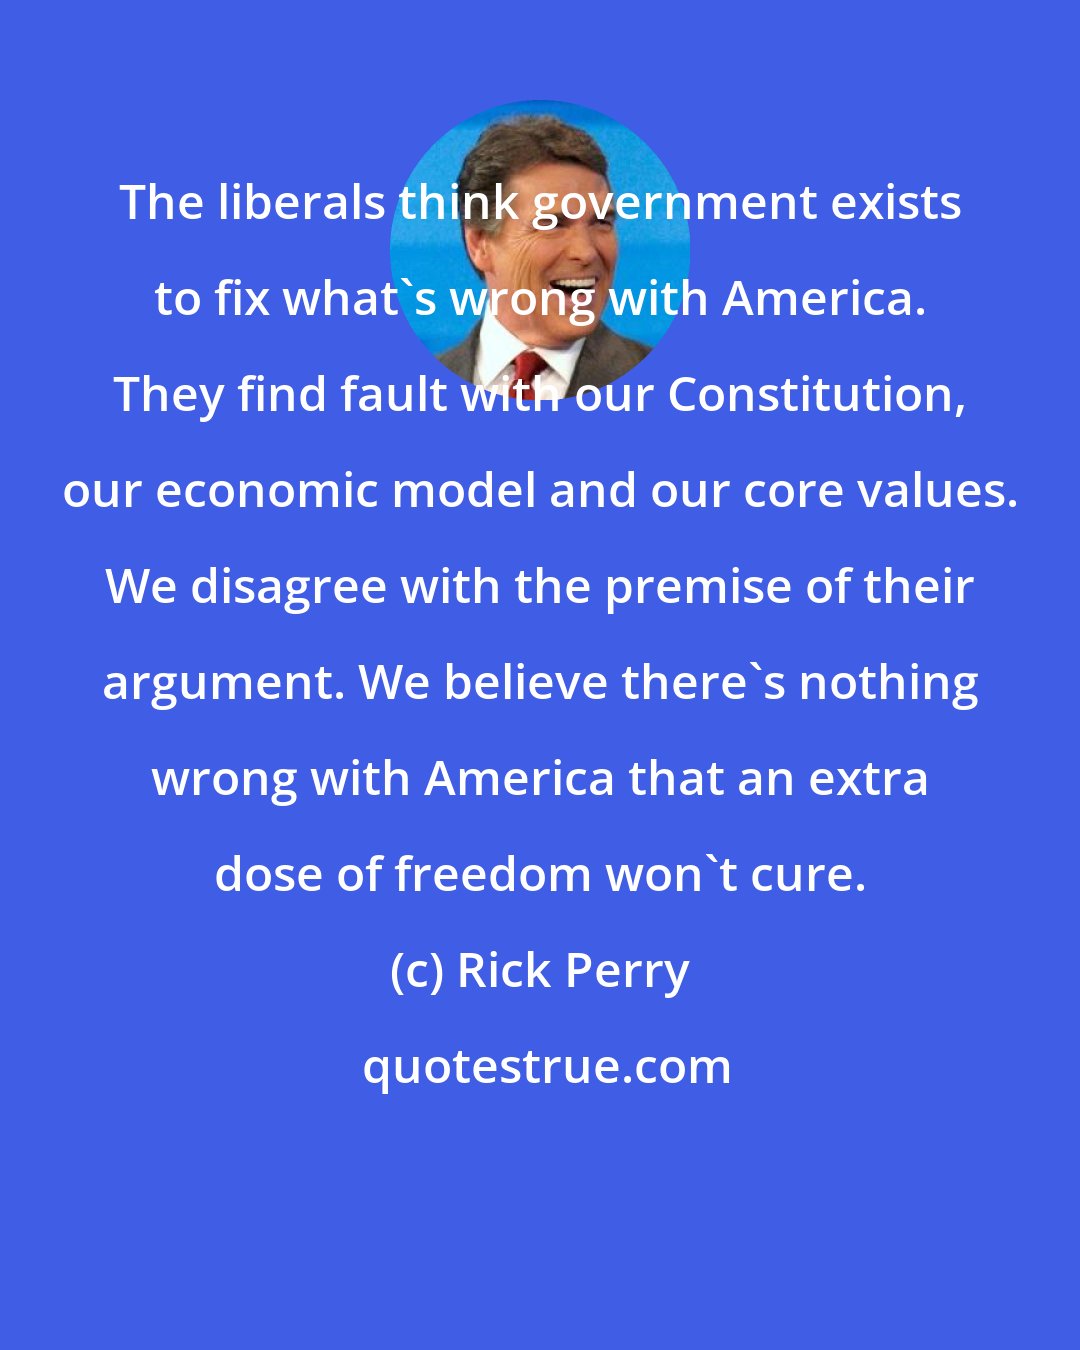 Rick Perry: The liberals think government exists to fix what's wrong with America. They find fault with our Constitution, our economic model and our core values. We disagree with the premise of their argument. We believe there's nothing wrong with America that an extra dose of freedom won't cure.